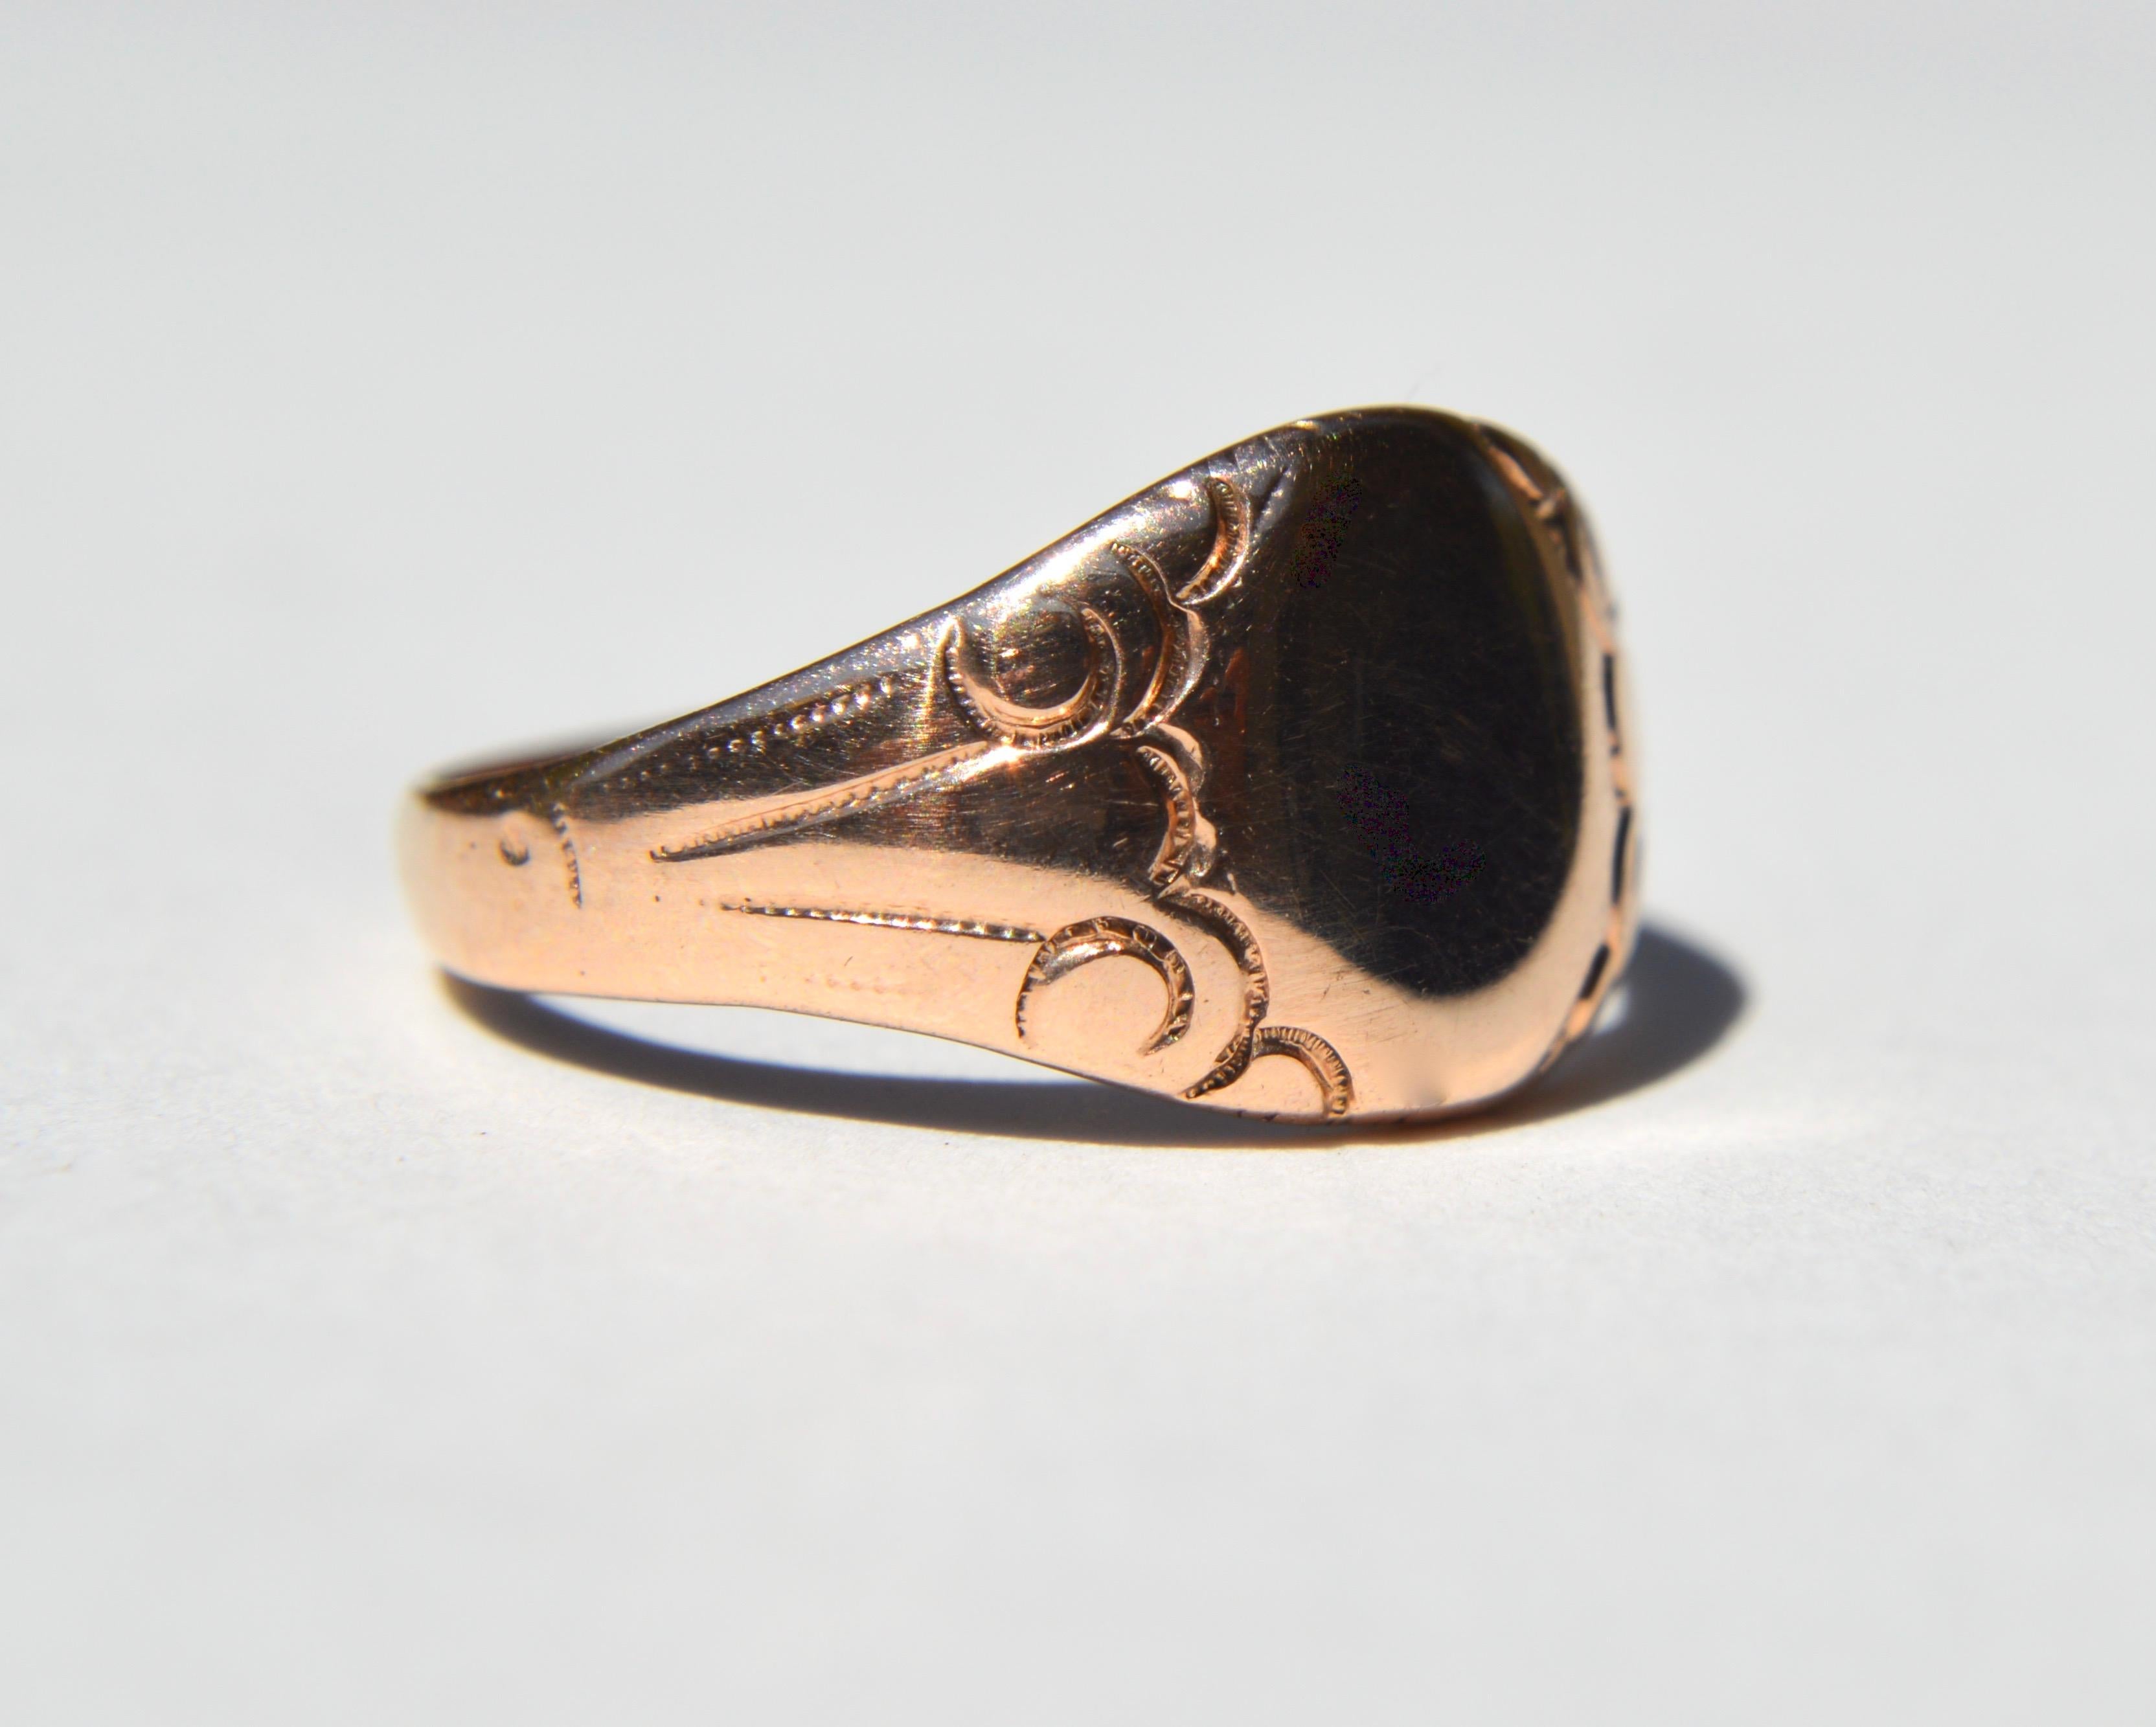 Beautiful antique Victorian era circa late 1880s 10K rose gold signet ring with delicate etched scrolling. Size 5, can be resized by a jeweler. Gold marks have been covered by a small piece of gold at some point in time. Ring has been acid tested as